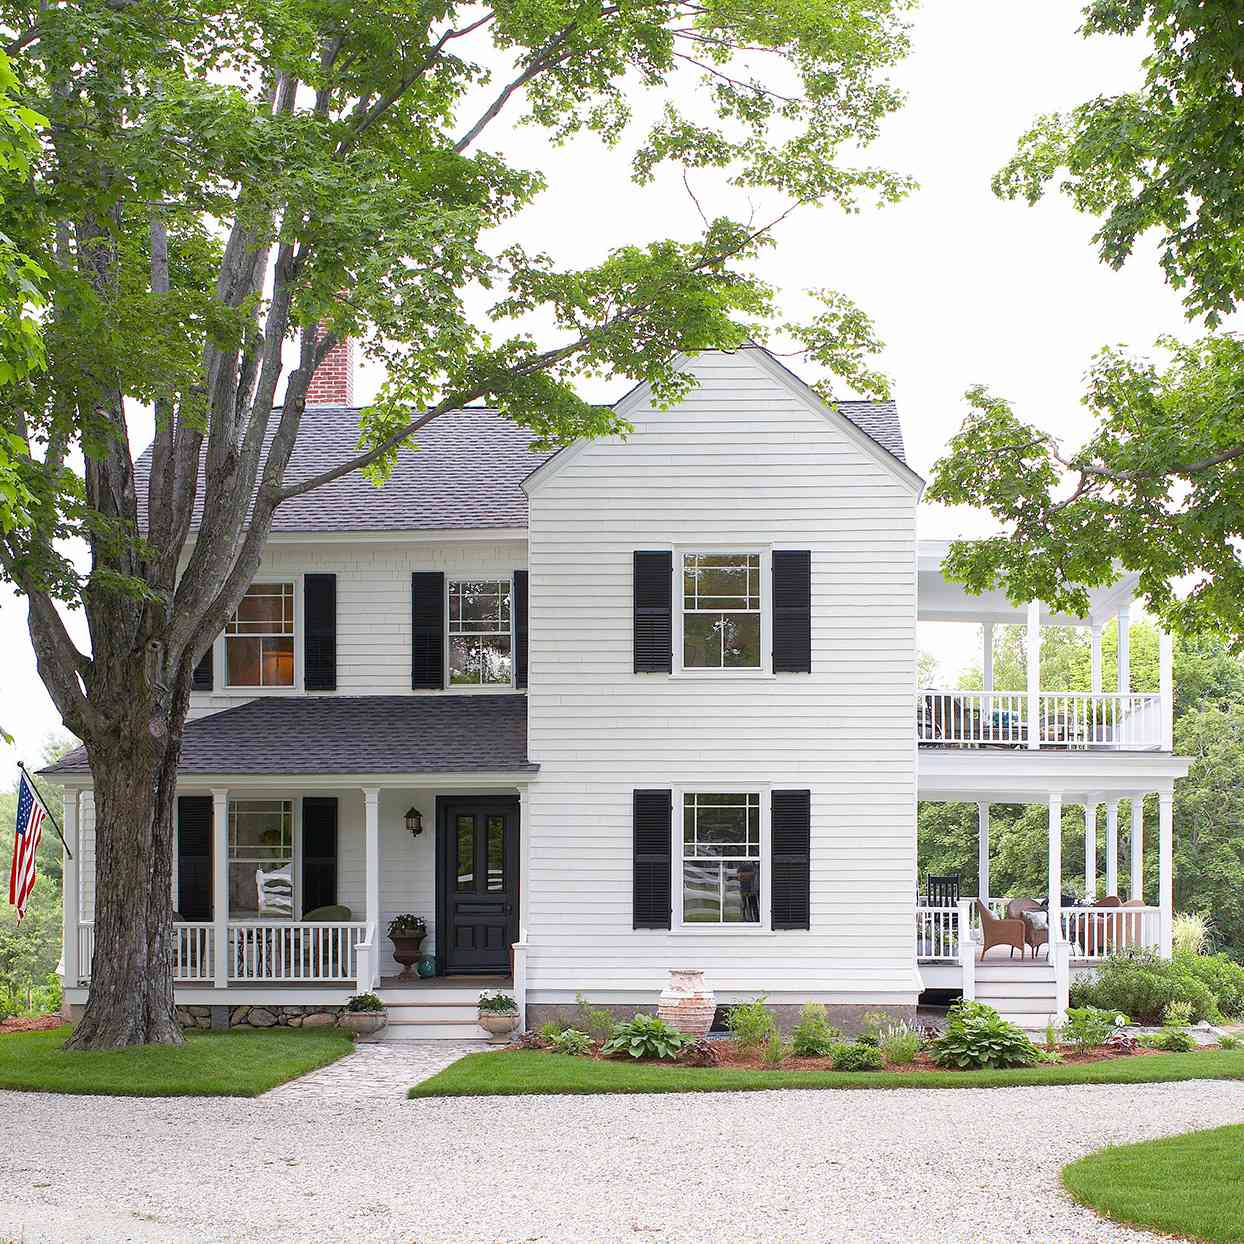 white-and-black traditional farmhouse